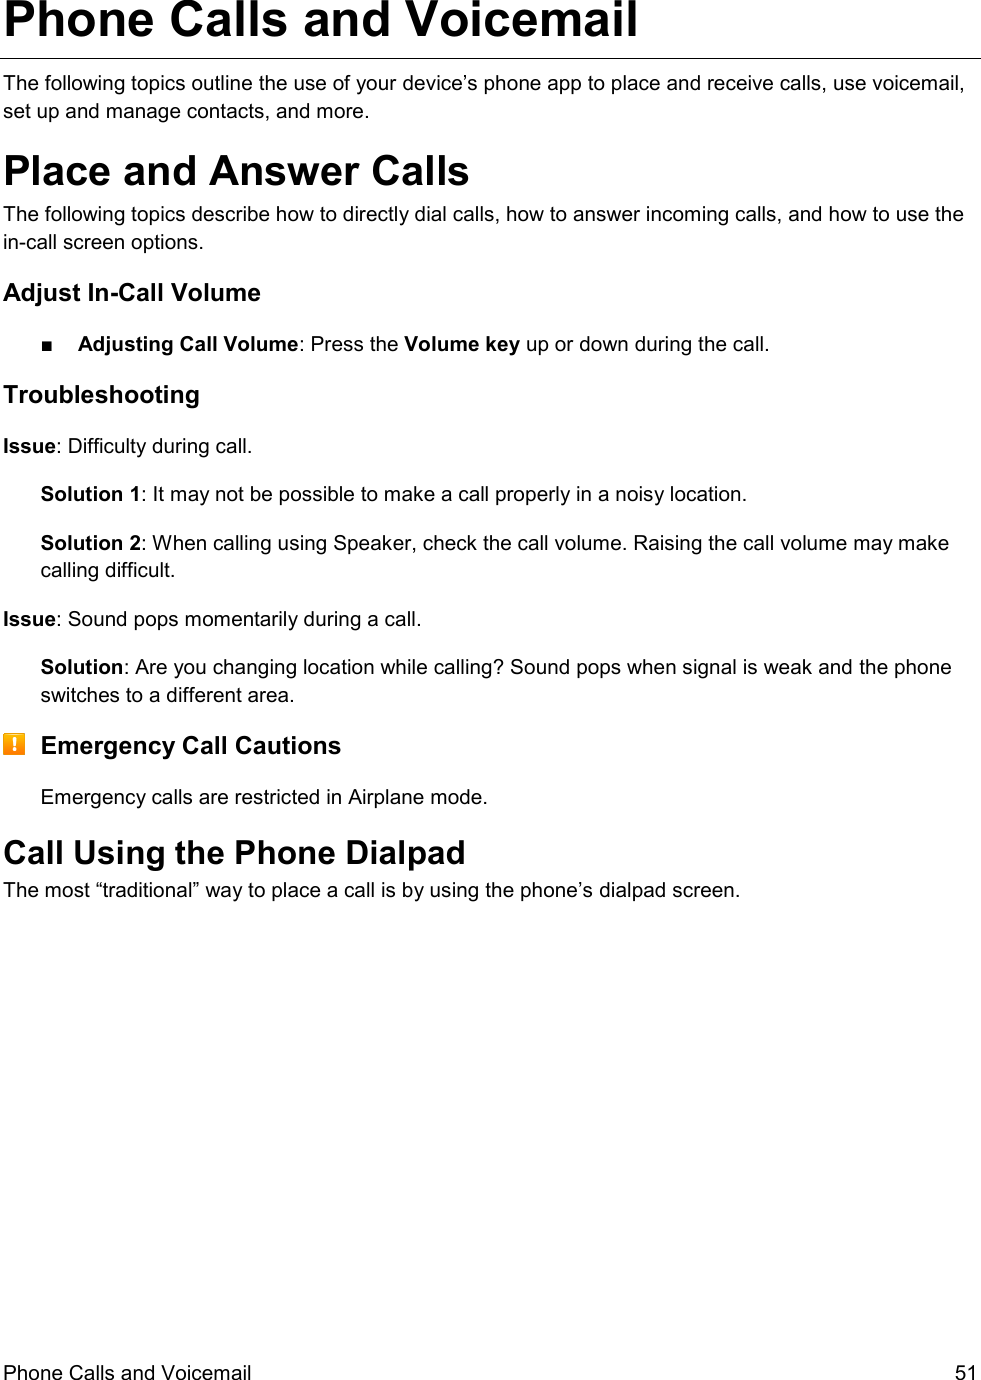  Phone Calls and Voicemail  51 Phone Calls and Voicemail The following topics outline the use of your device’s phone app to place and receive calls, use voicemail, set up and manage contacts, and more. Place and Answer Calls The following topics describe how to directly dial calls, how to answer incoming calls, and how to use the in-call screen options. Adjust In-Call Volume ■  Adjusting Call Volume: Press the Volume key up or down during the call. Troubleshooting Issue: Difficulty during call. Solution 1: It may not be possible to make a call properly in a noisy location. Solution 2: When calling using Speaker, check the call volume. Raising the call volume may make calling difficult. Issue: Sound pops momentarily during a call. Solution: Are you changing location while calling? Sound pops when signal is weak and the phone switches to a different area.  Emergency Call Cautions Emergency calls are restricted in Airplane mode. Call Using the Phone Dialpad The most “traditional” way to place a call is by using the phone’s dialpad screen.  